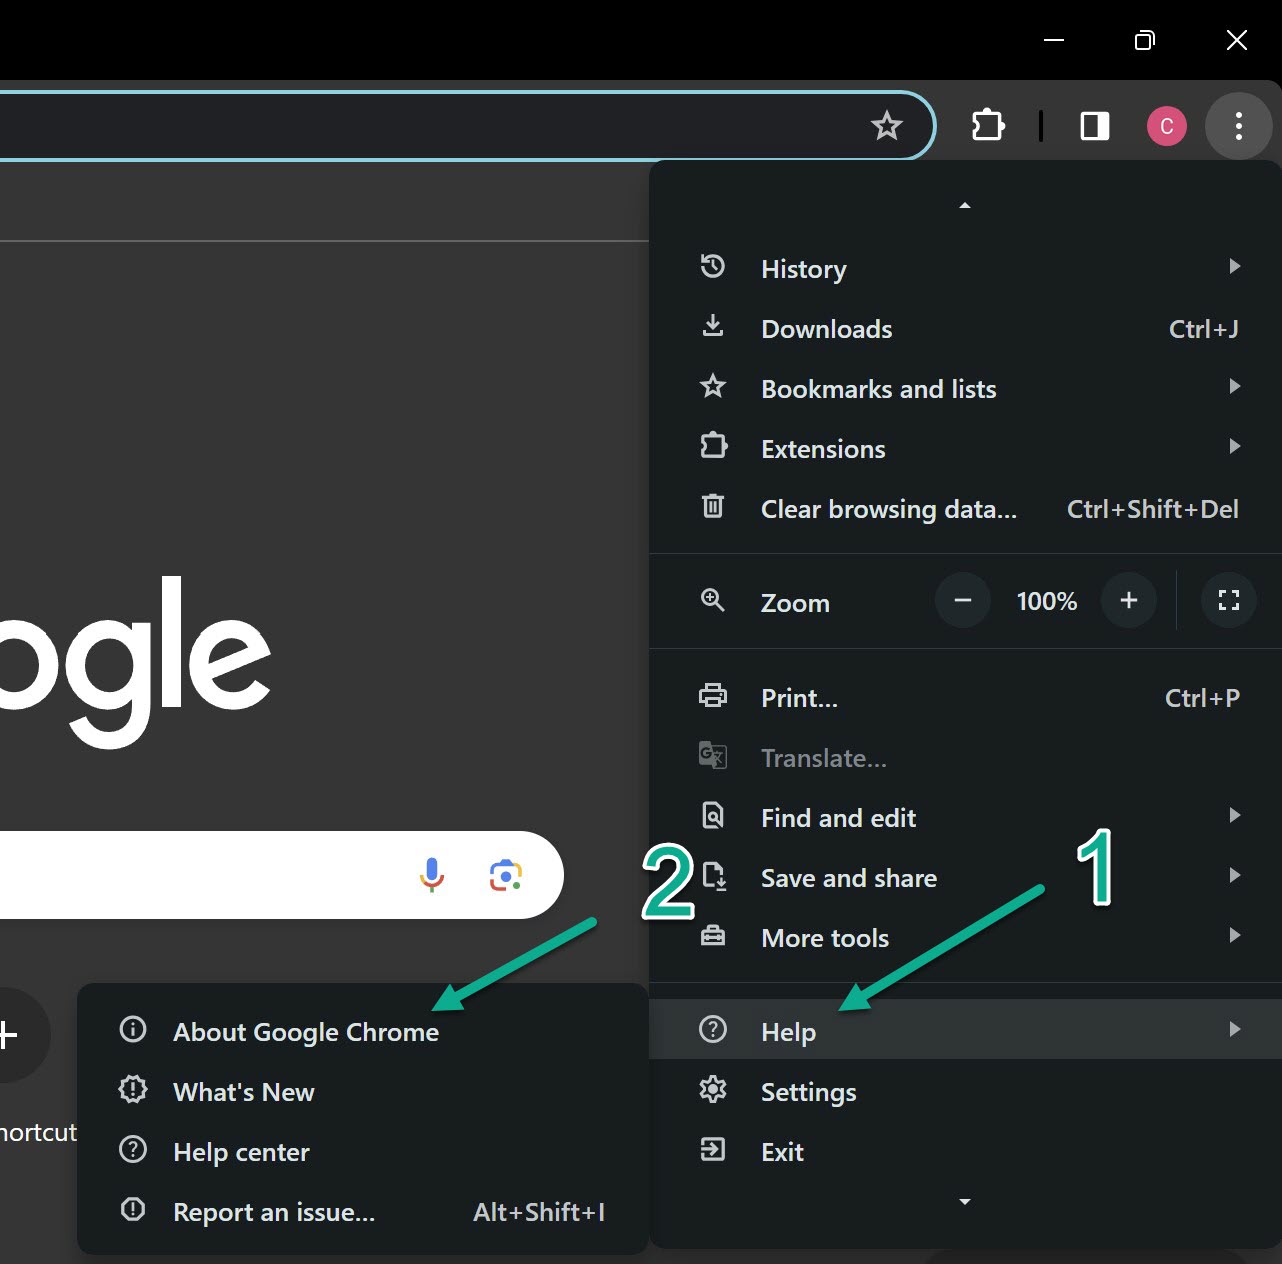 Google Chrome No Sound? 12 Easy Fixes to Get Your Audio Back (Reset, Update + More) 2